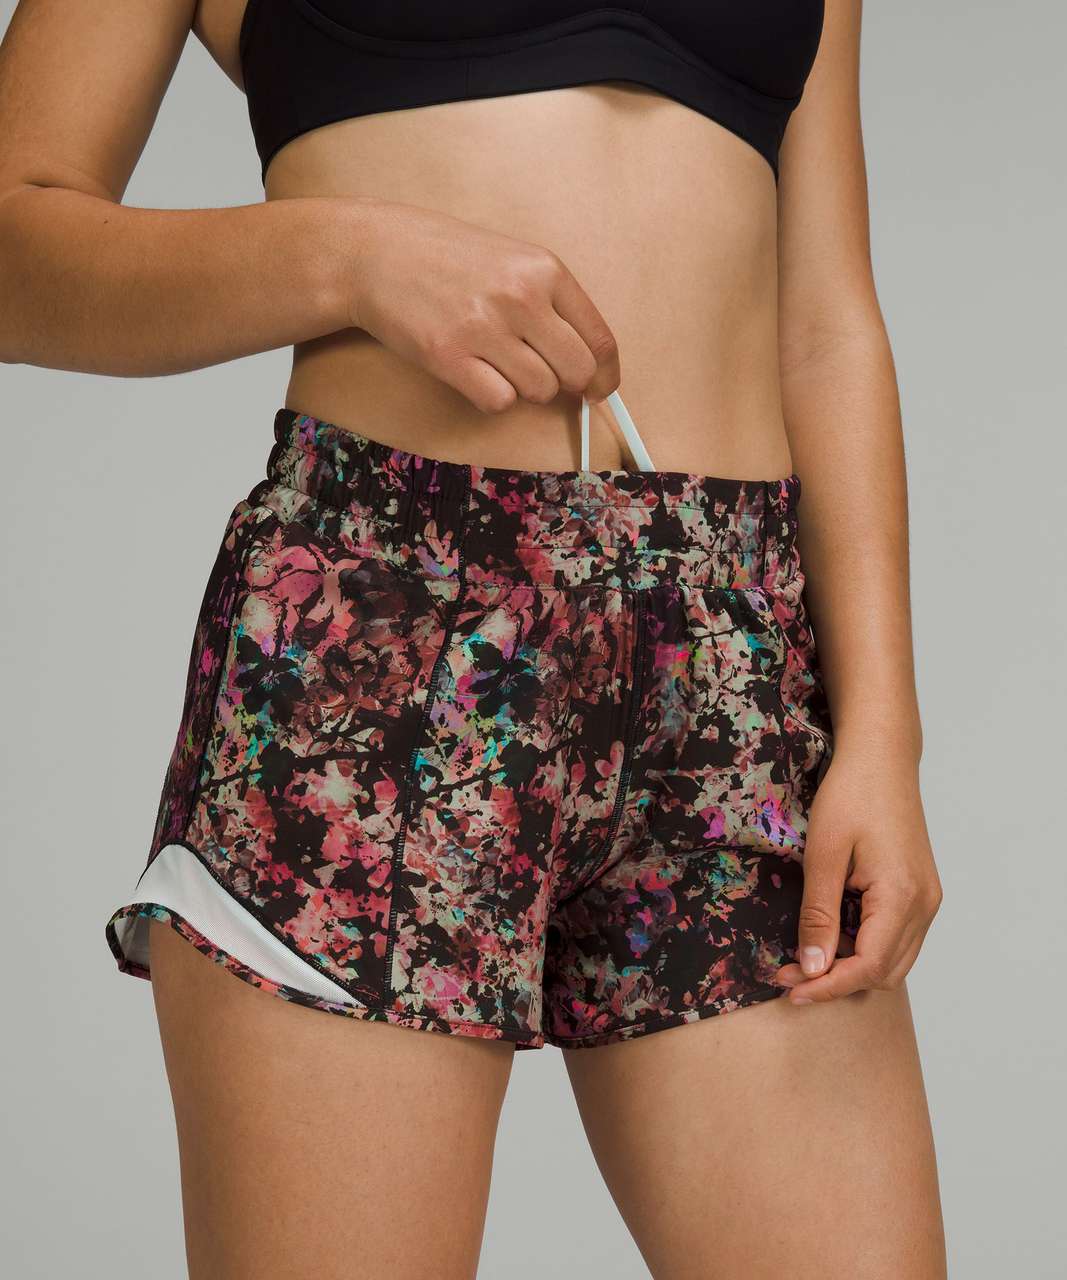 Lululemon Hotty Hot Low-Rise Lined Short 4" - Stencil Blossom Red Multi / Sheer Blue